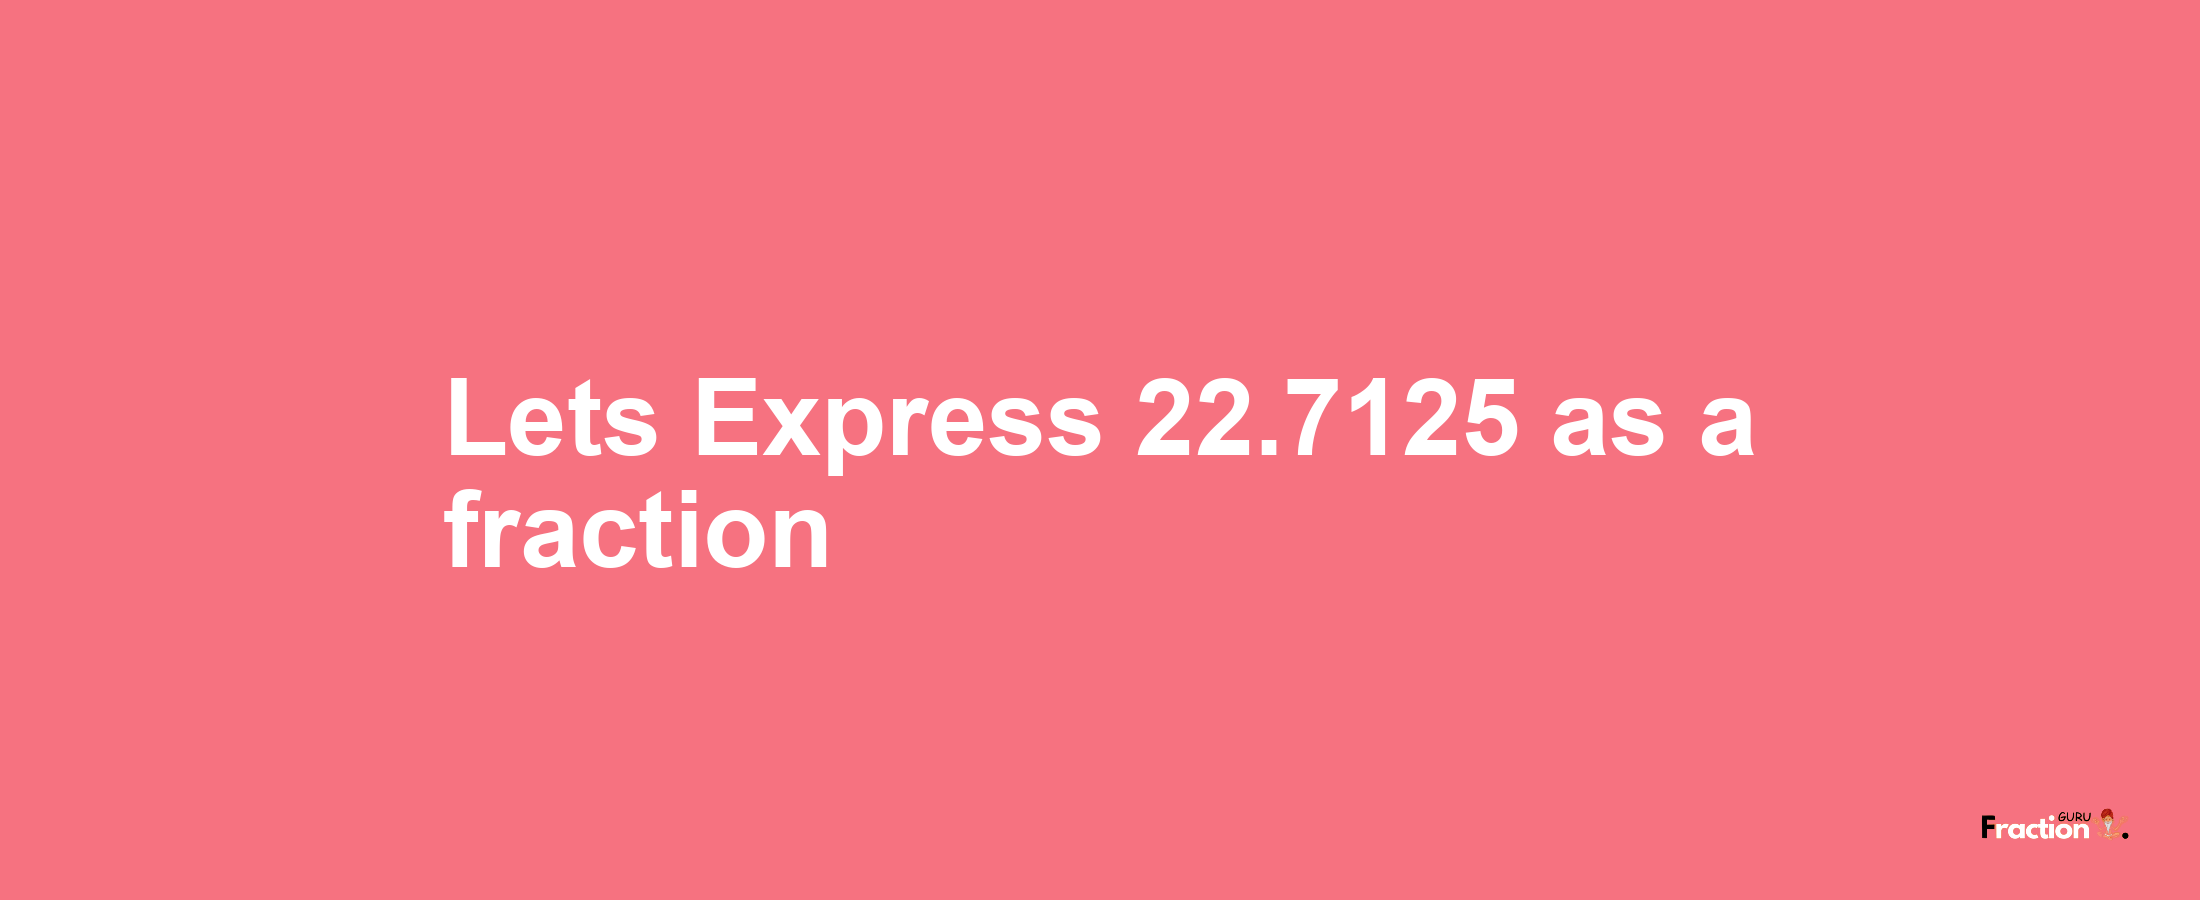 Lets Express 22.7125 as afraction